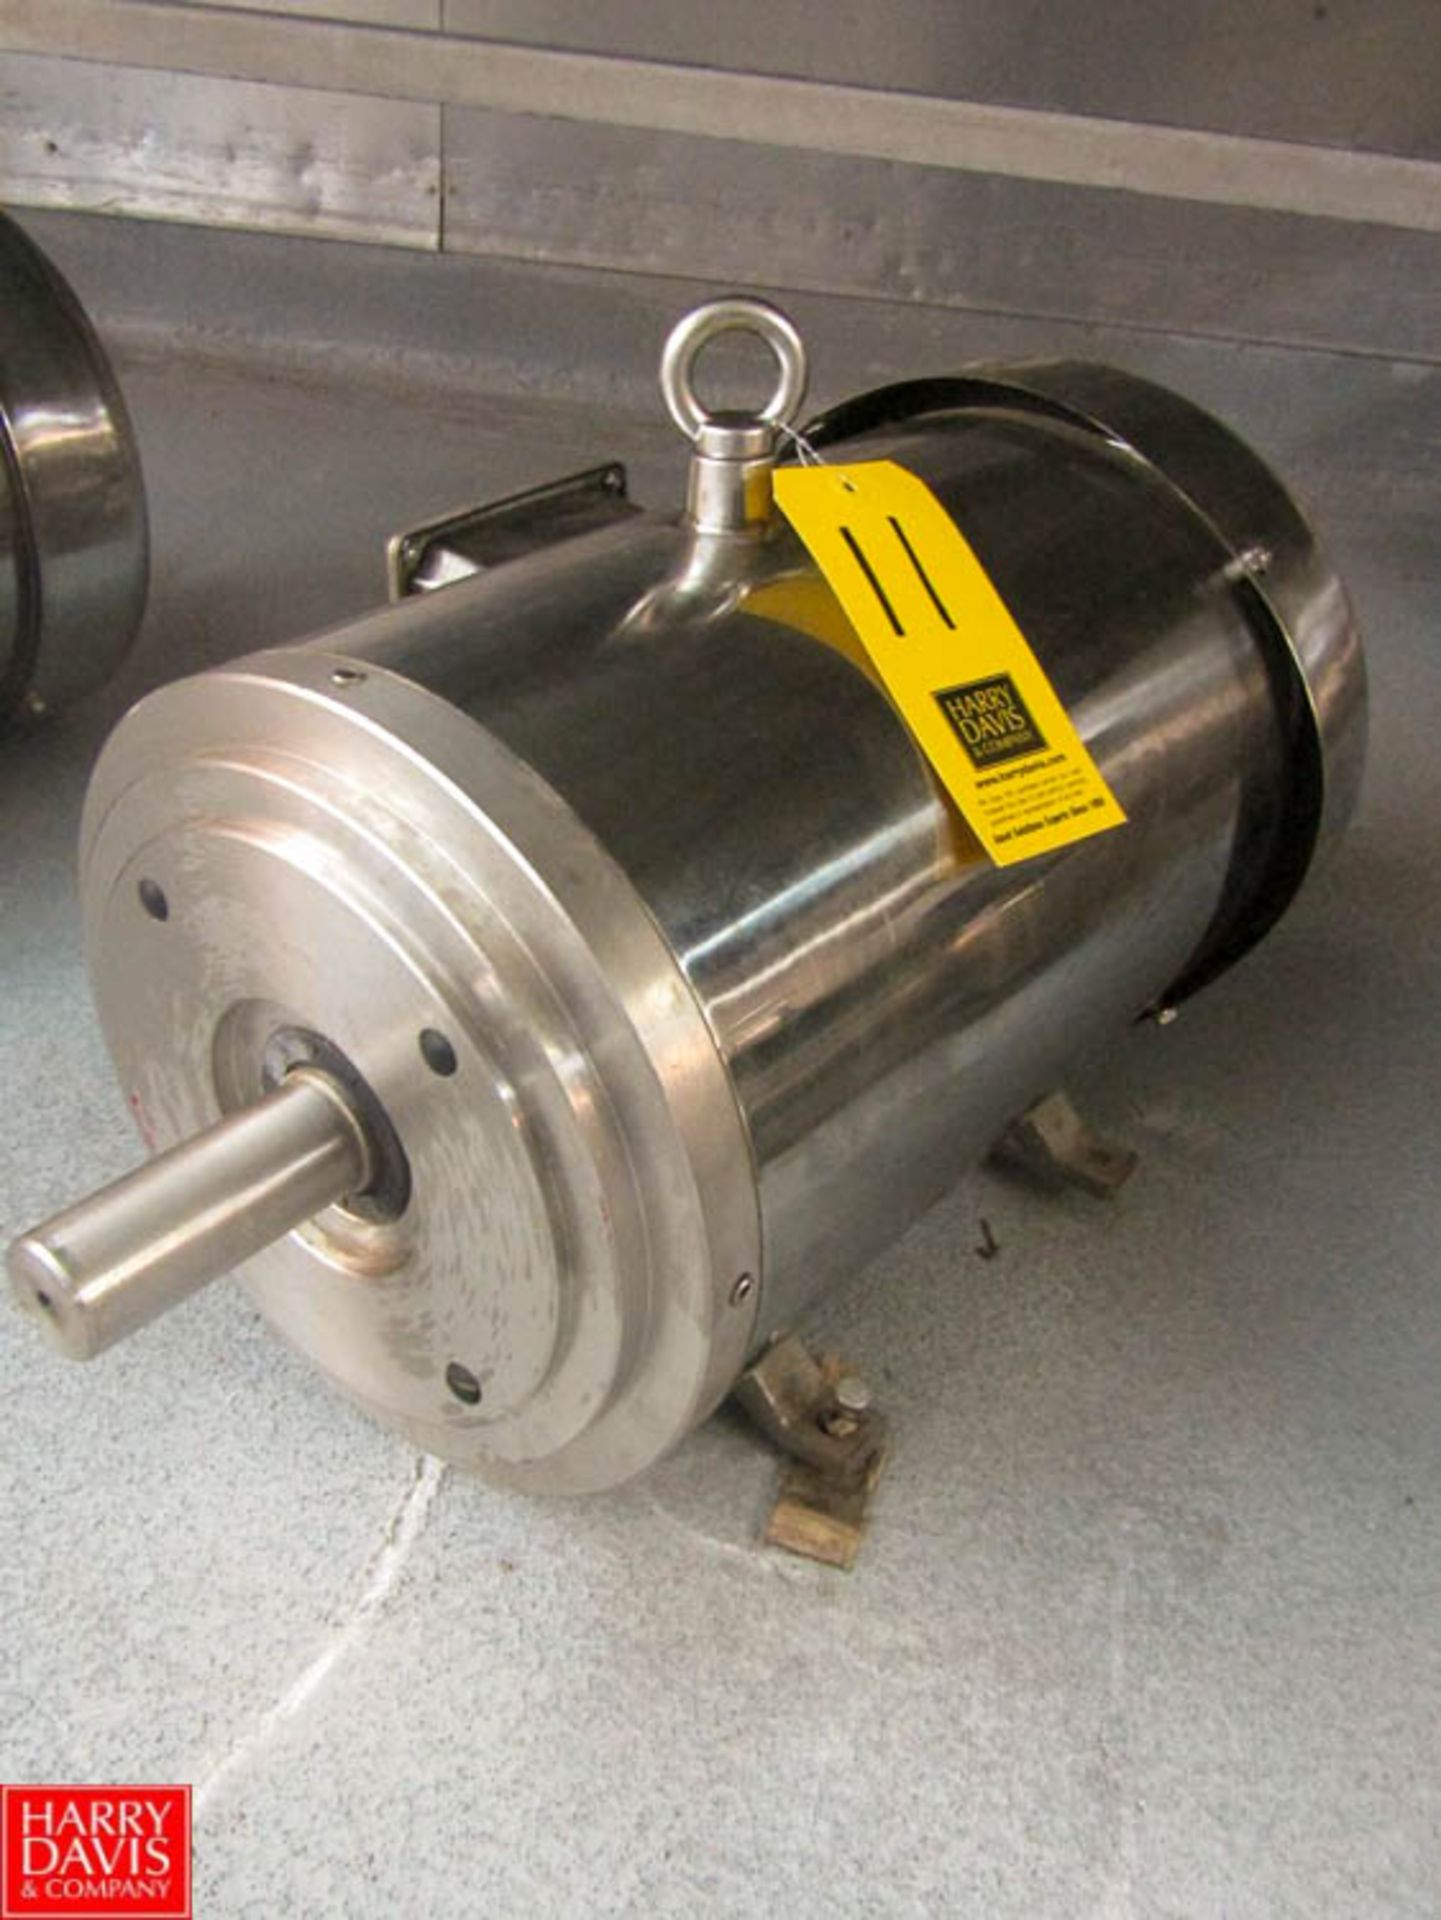 NEW North American Electric S/S Clad 15 HP Motor 3 540 RPM Model SS254TC15M-2 Rigging Fee: $ 30